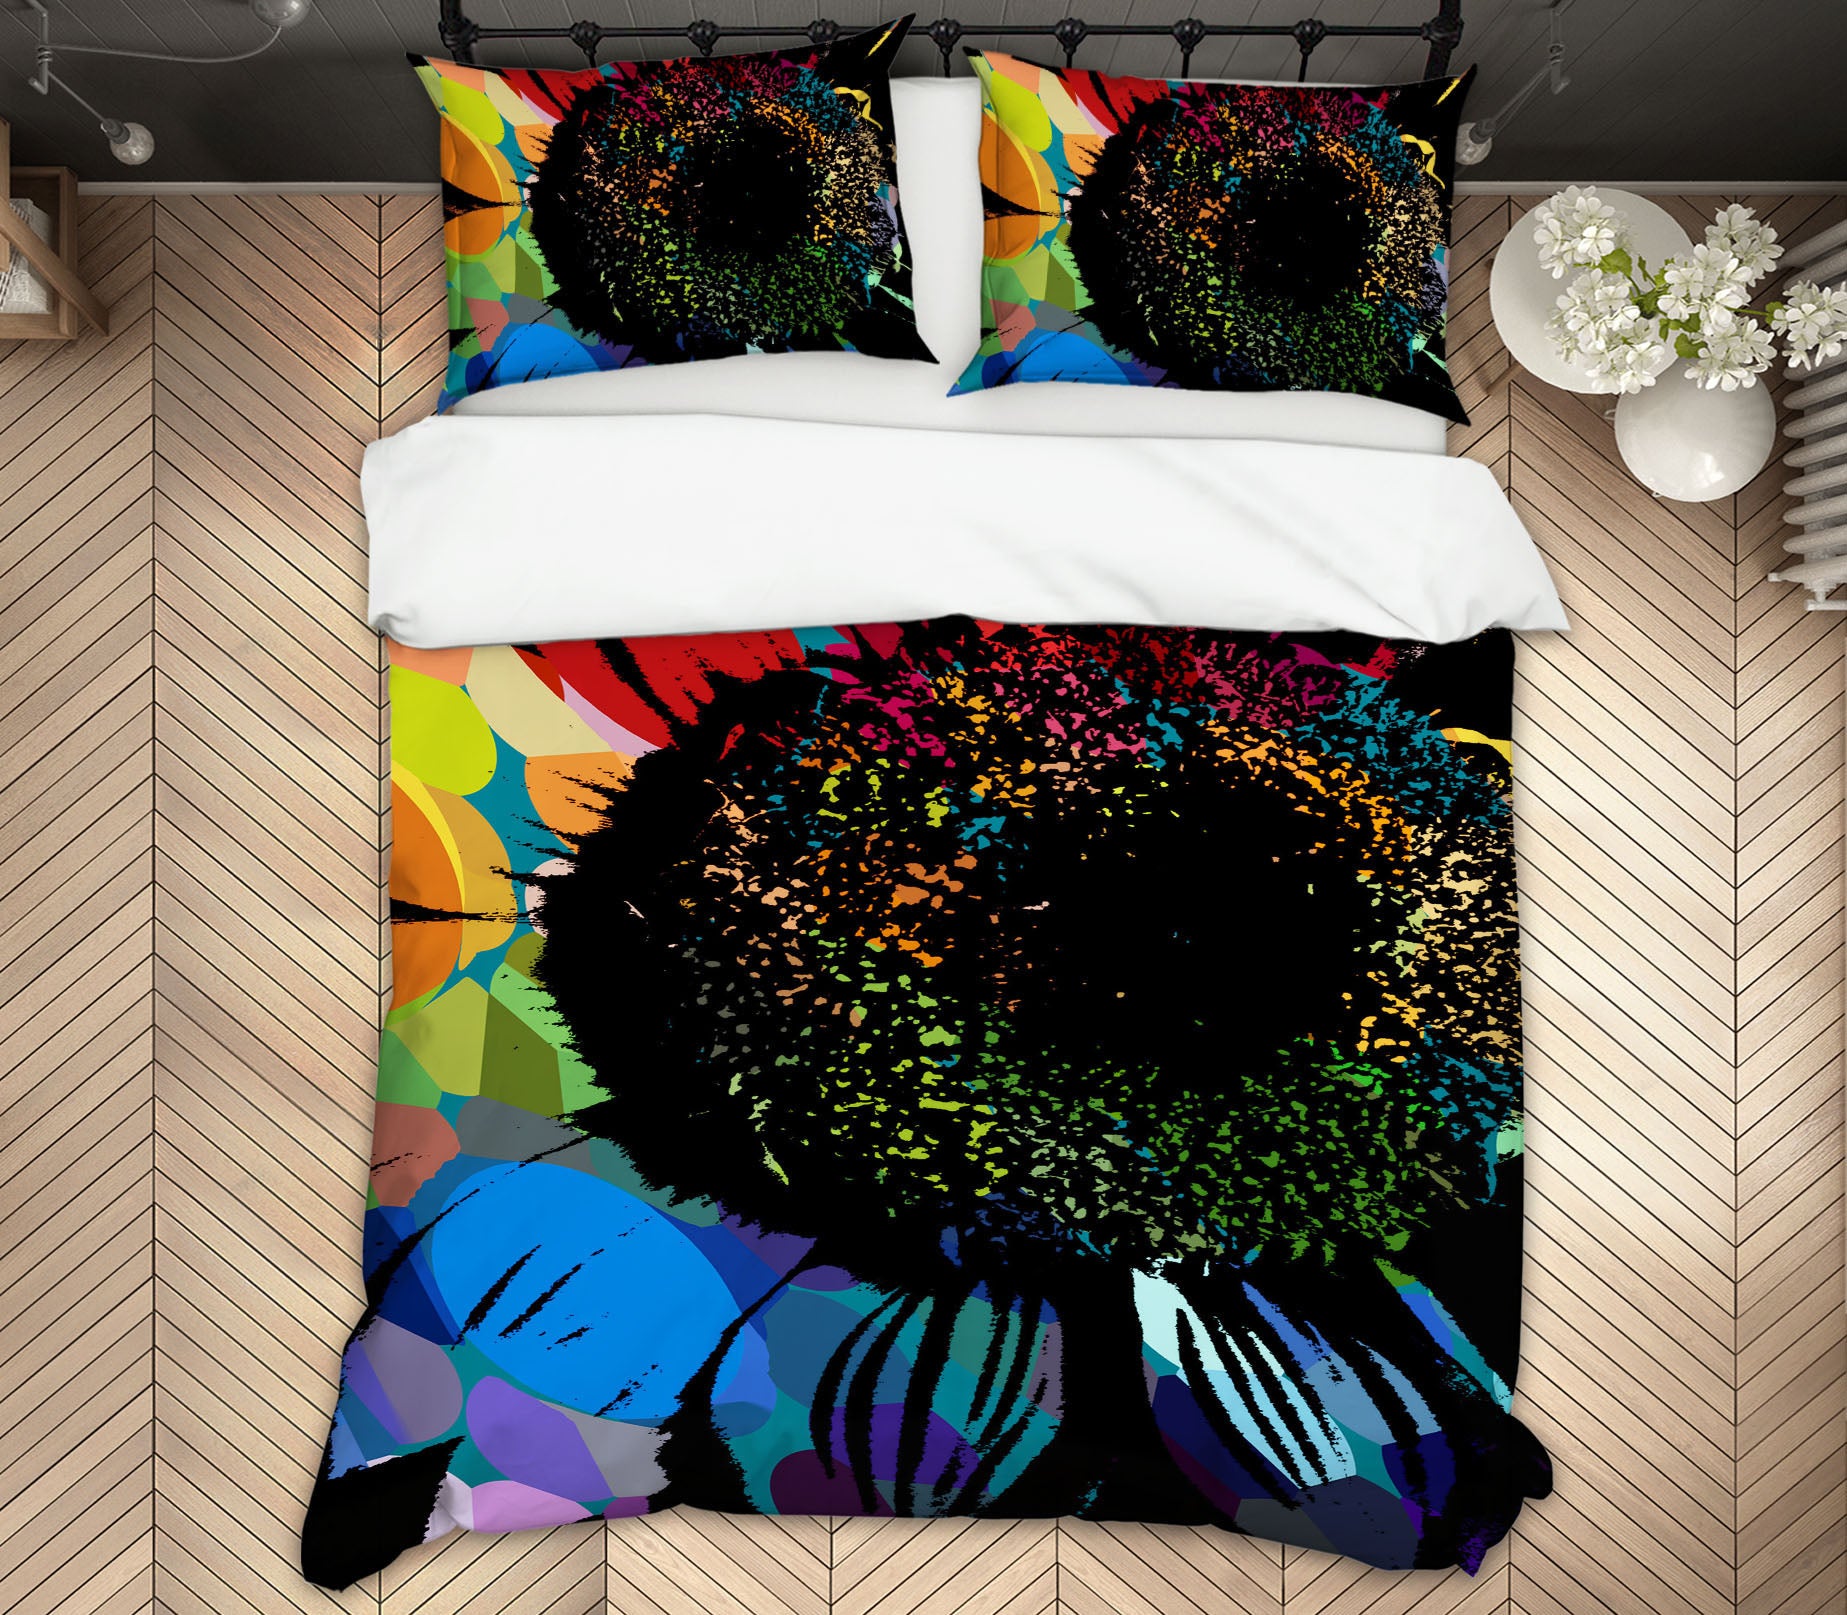 3D Colored Petals 19131 Shandra Smith Bedding Bed Pillowcases Quilt